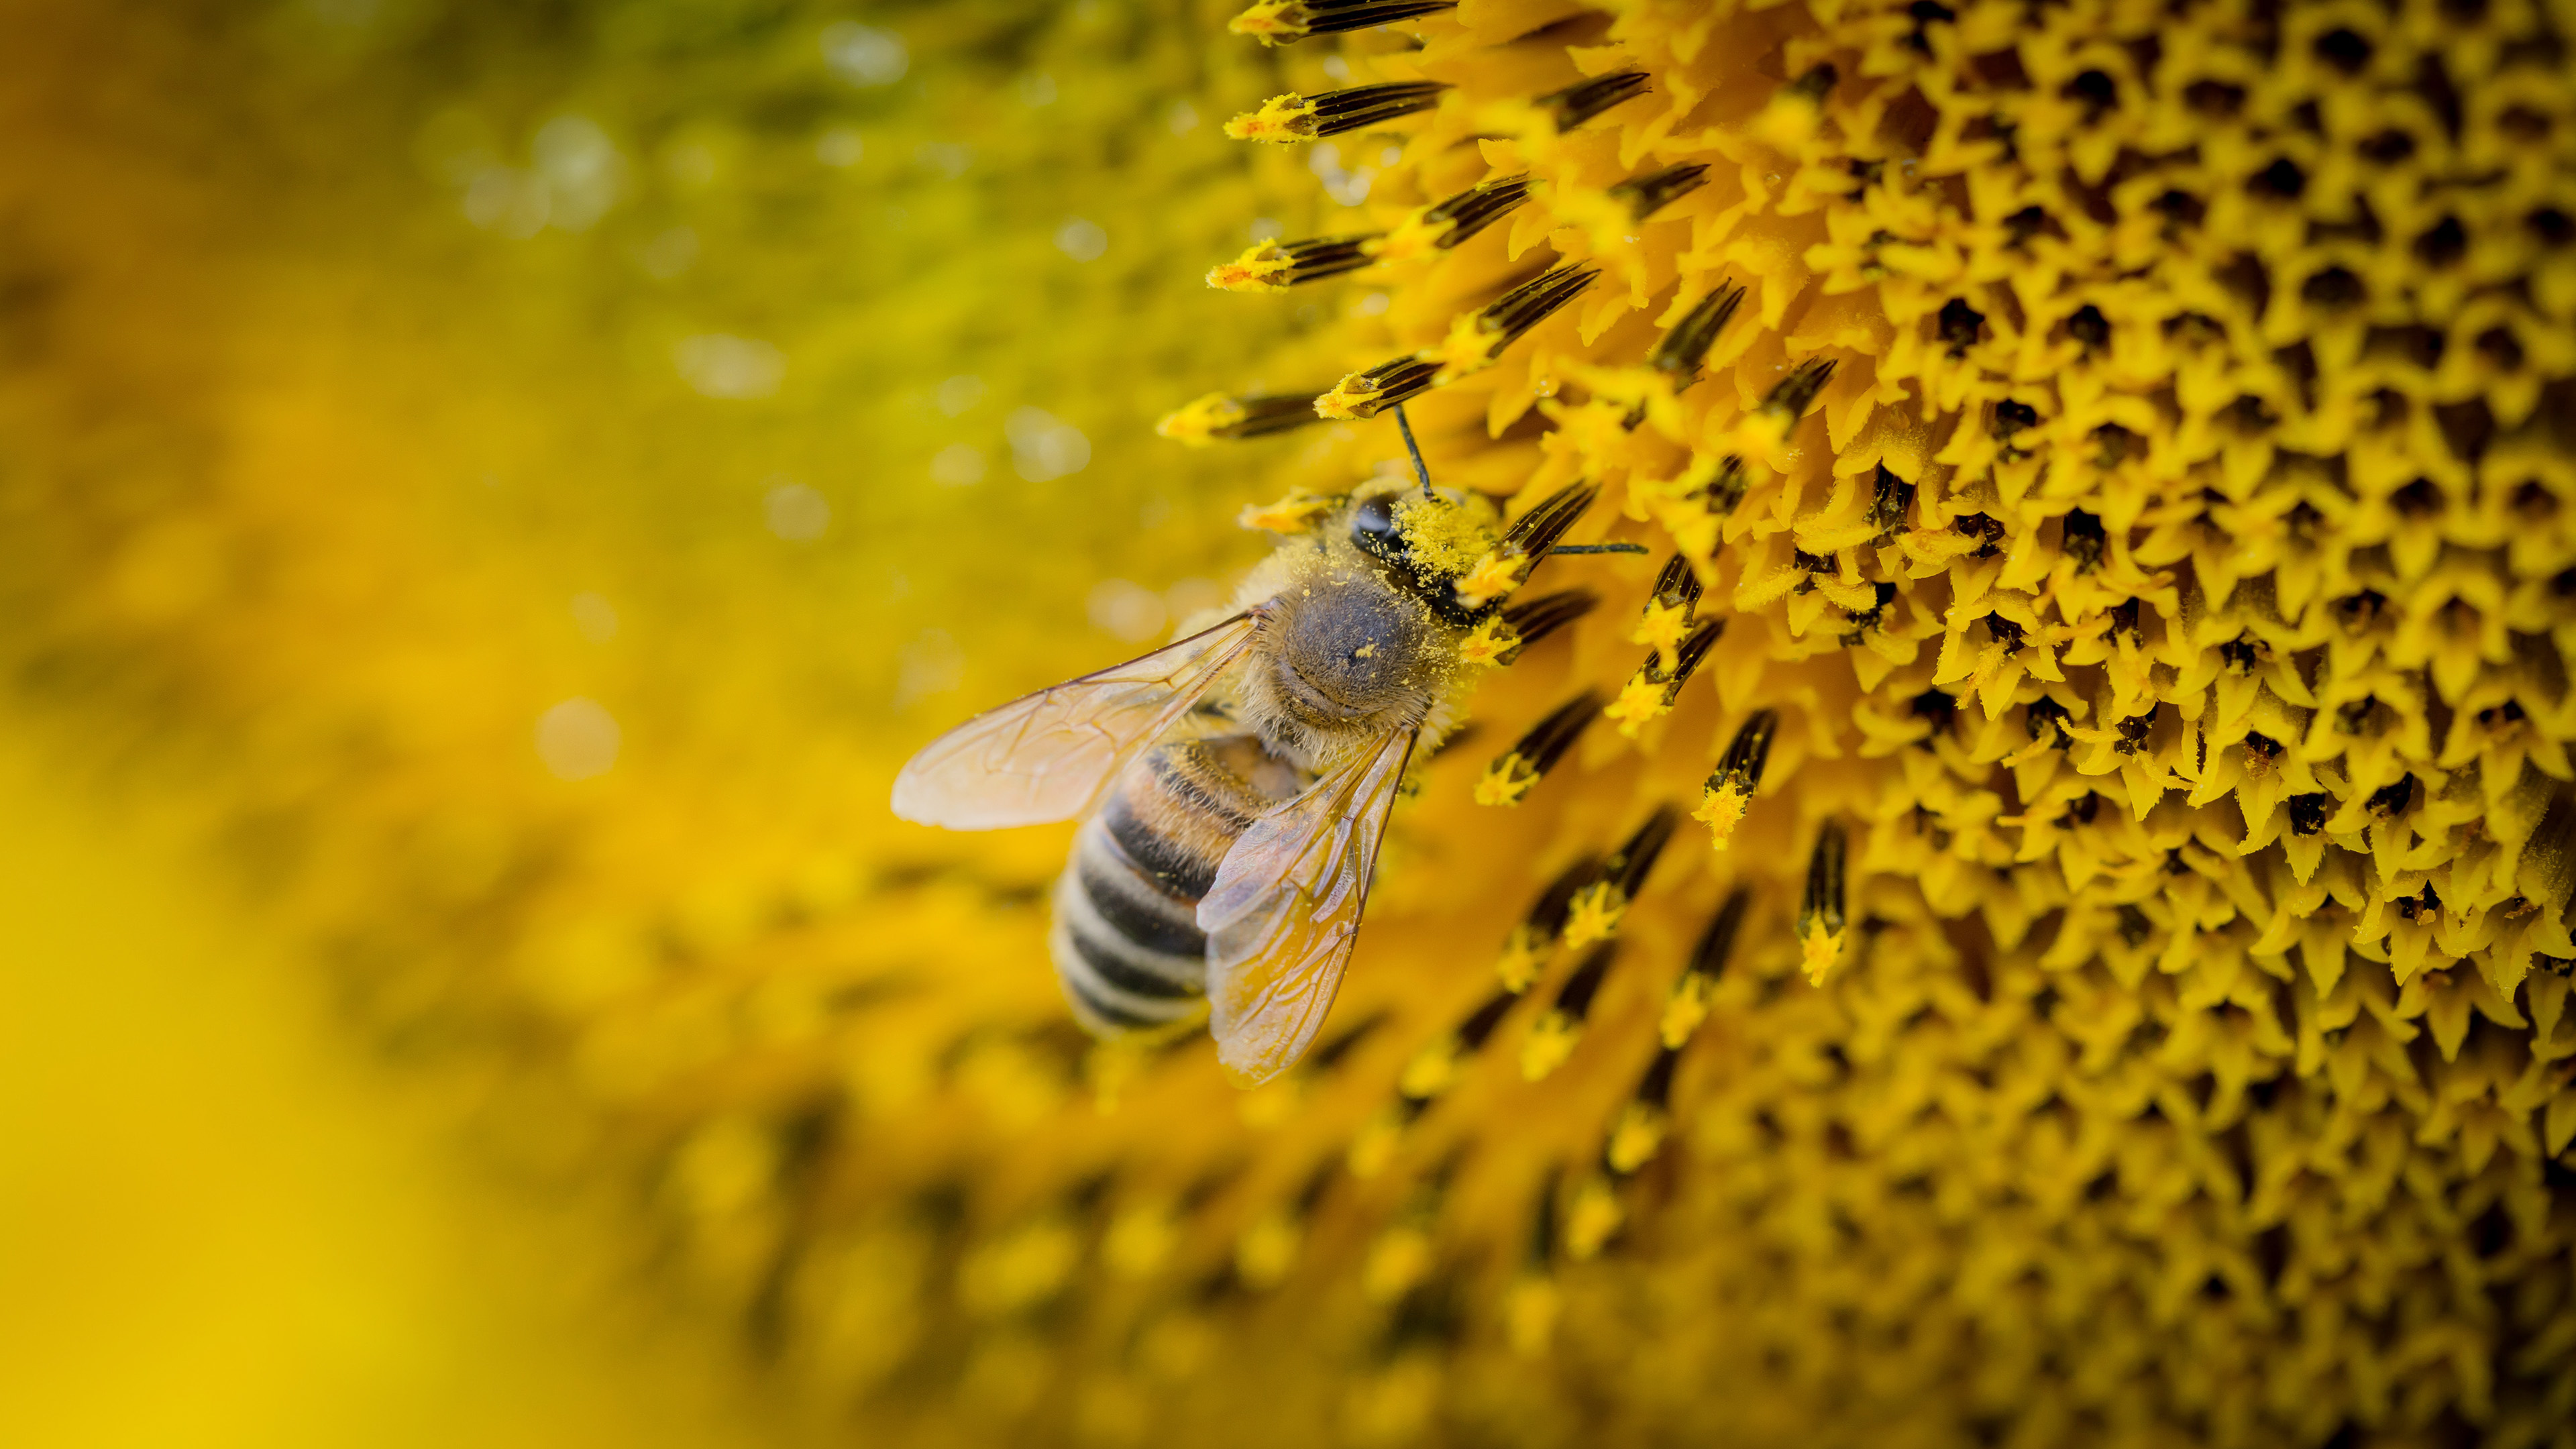 100+ Honey Pictures & Images | Download Free Photos on Unsplash